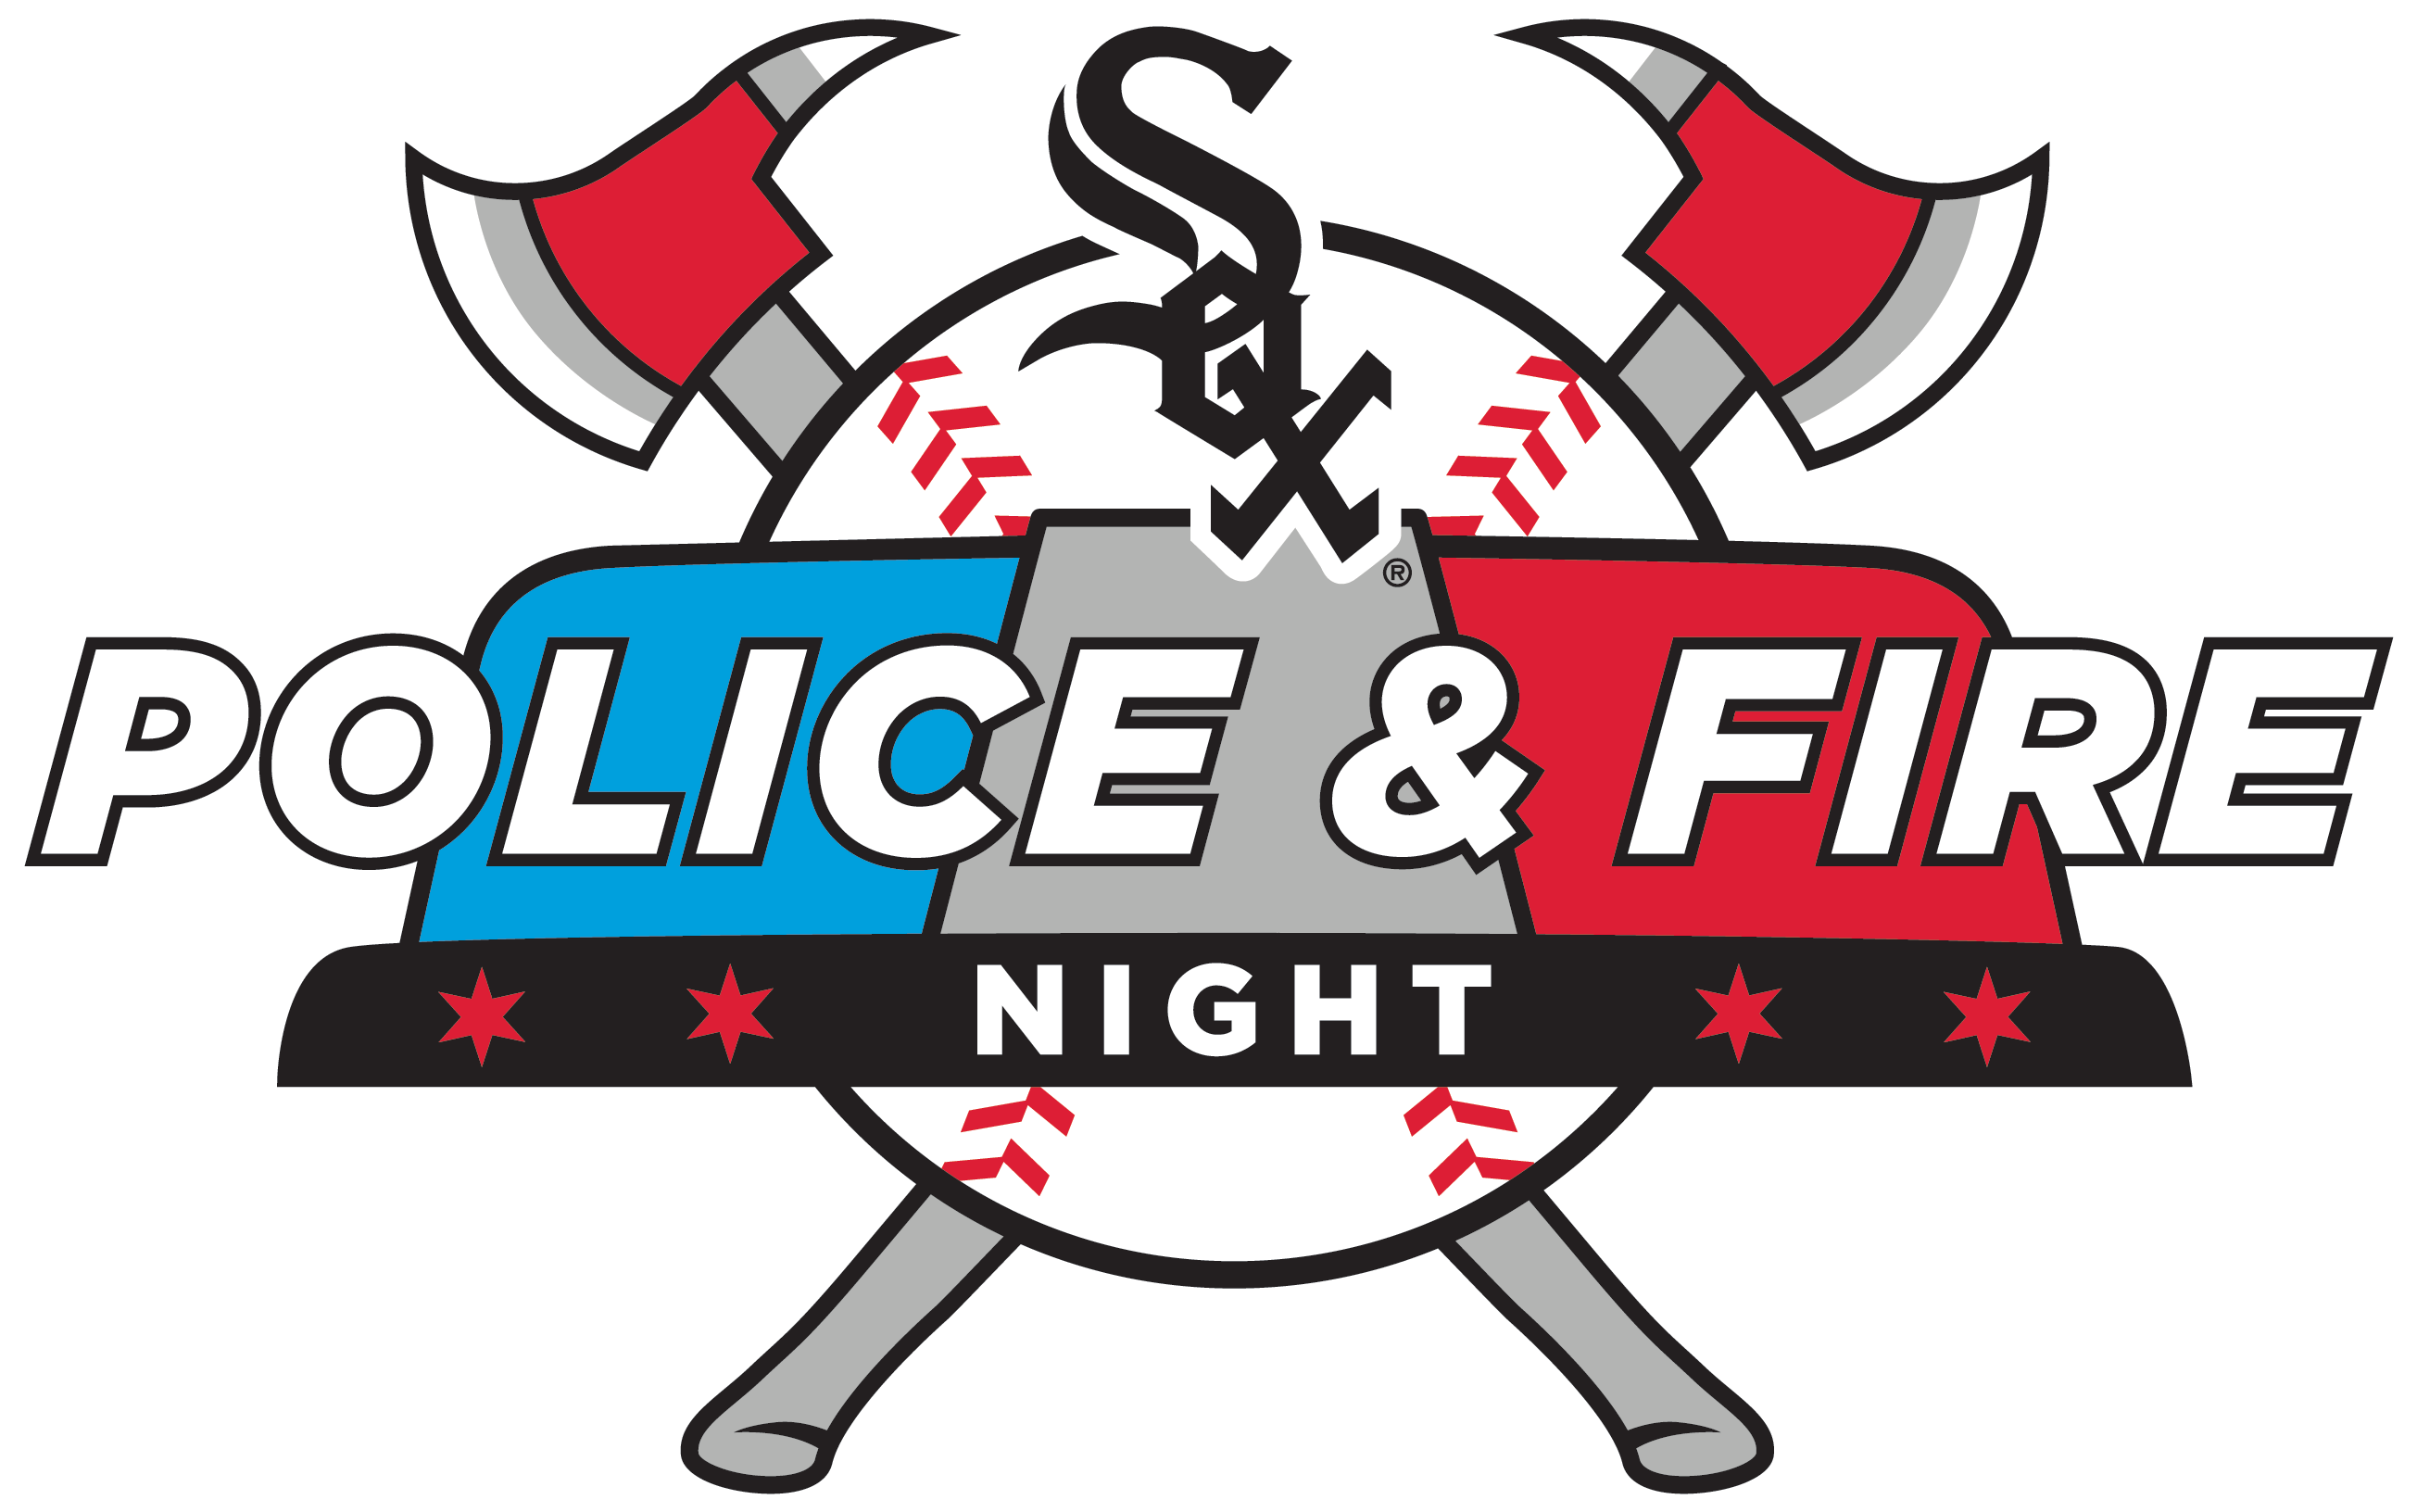 Police Fire Night Chicago White Sox